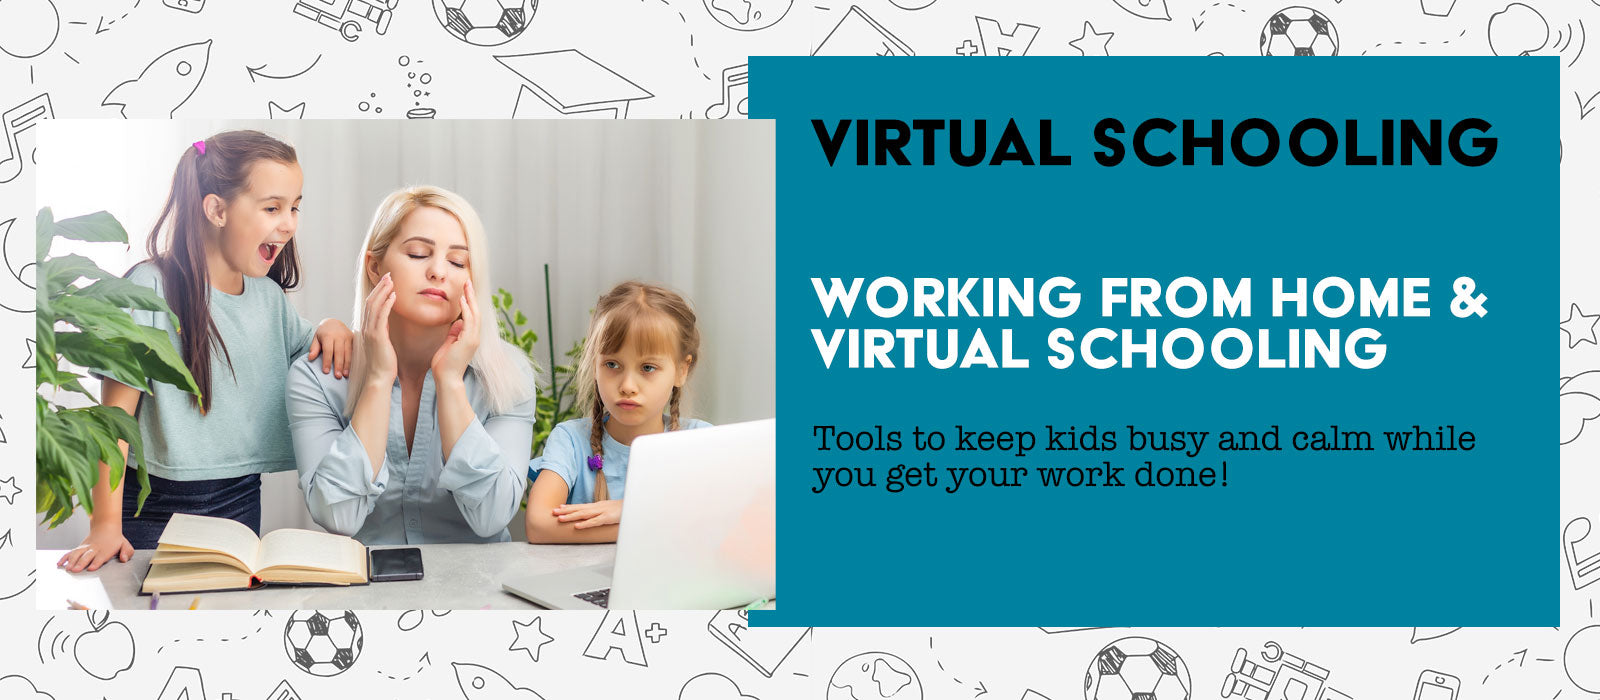 Virtual Schooling: Working from Home & Virtual Schooling